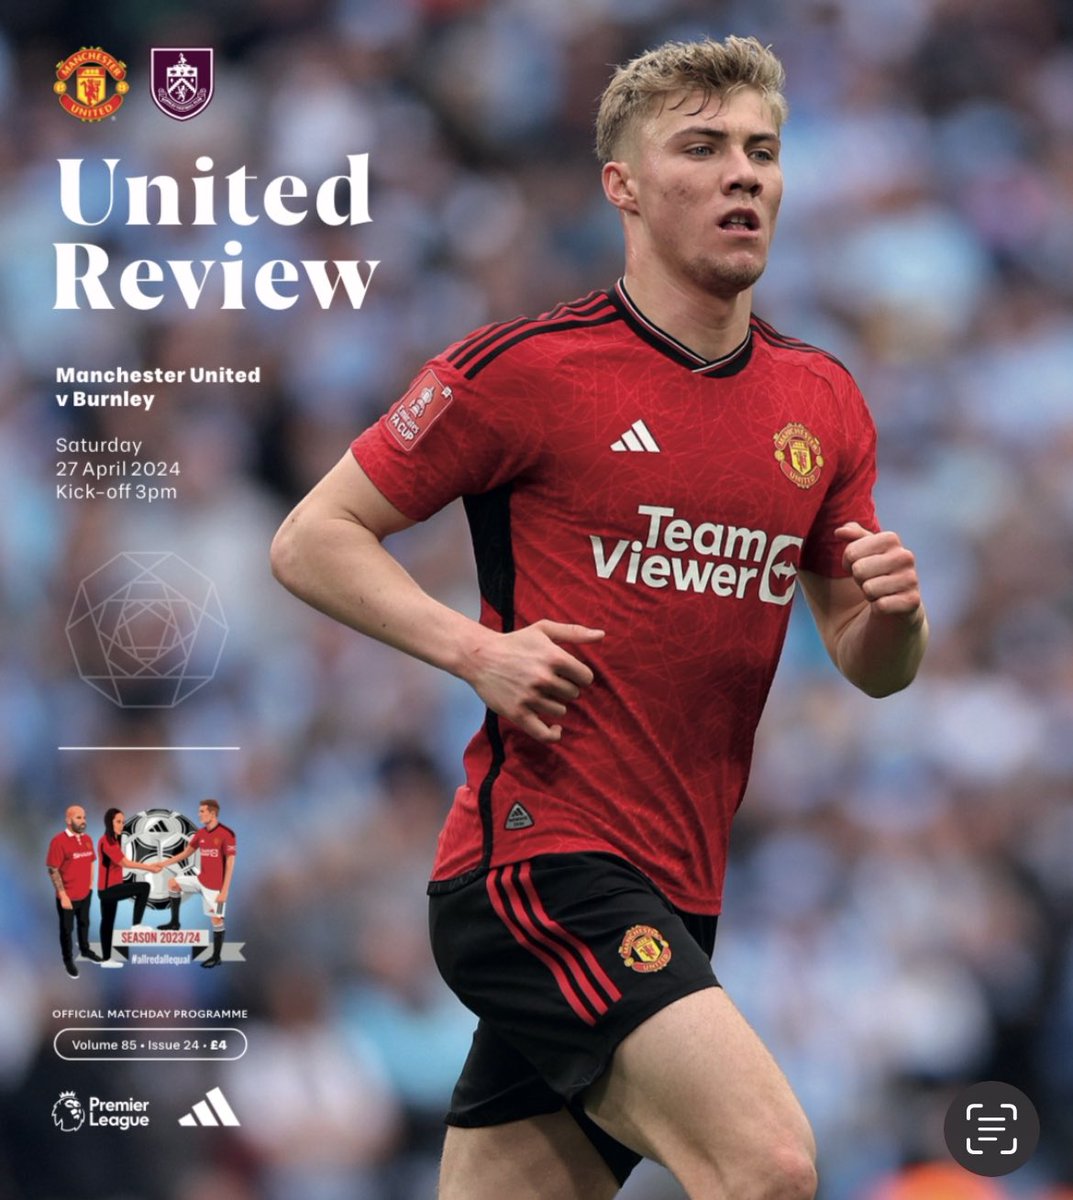 Not the result we wanted, but it was great to see @utdfanculture & @RealChangeMANC featured again in the iconic United Review. Thank you to all followers & those who have submitted photos. Please keep spreading the word. I appreciate your support ✊❤️🇾🇪 #mufc #realchangemcr